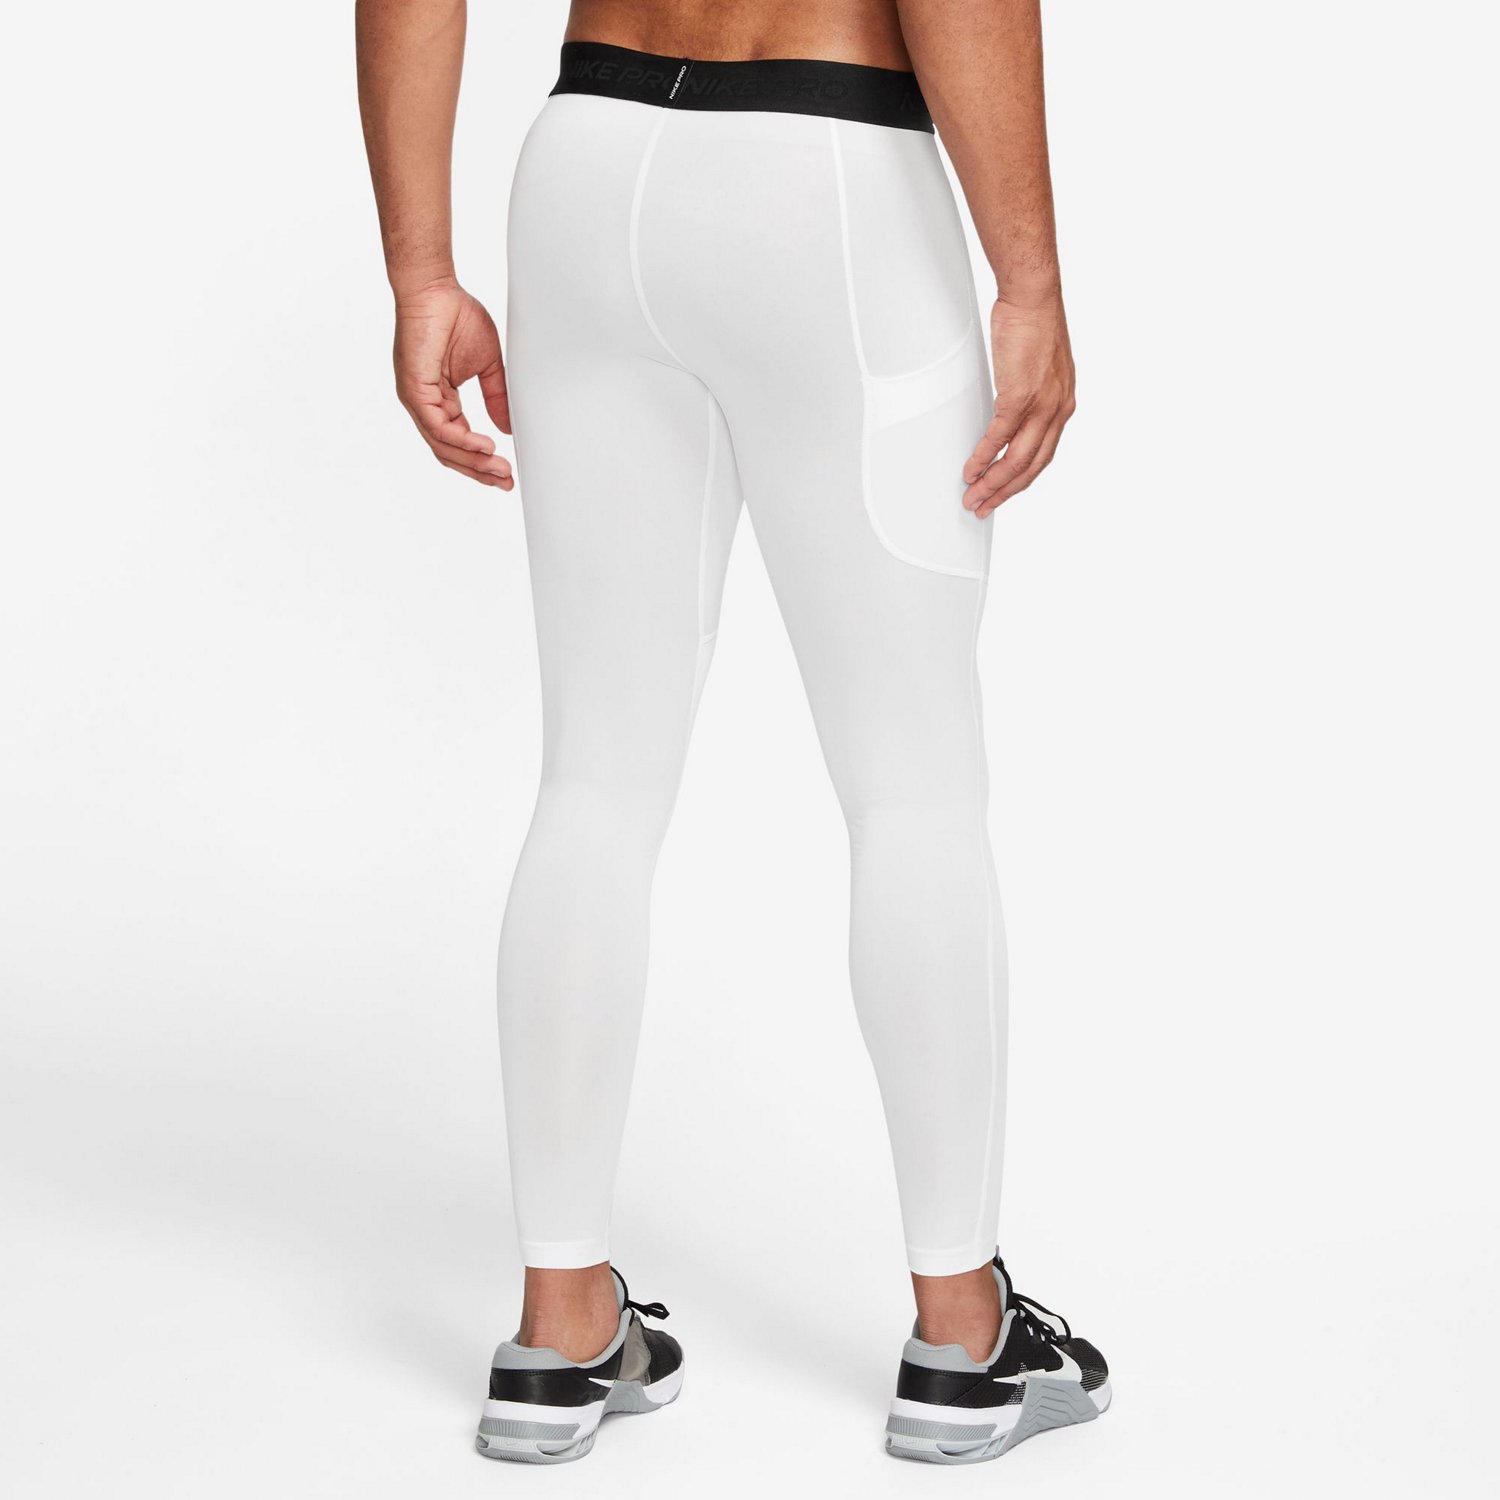 Nike Men's Pro Dri-FIT Tights | Free Shipping at Academy